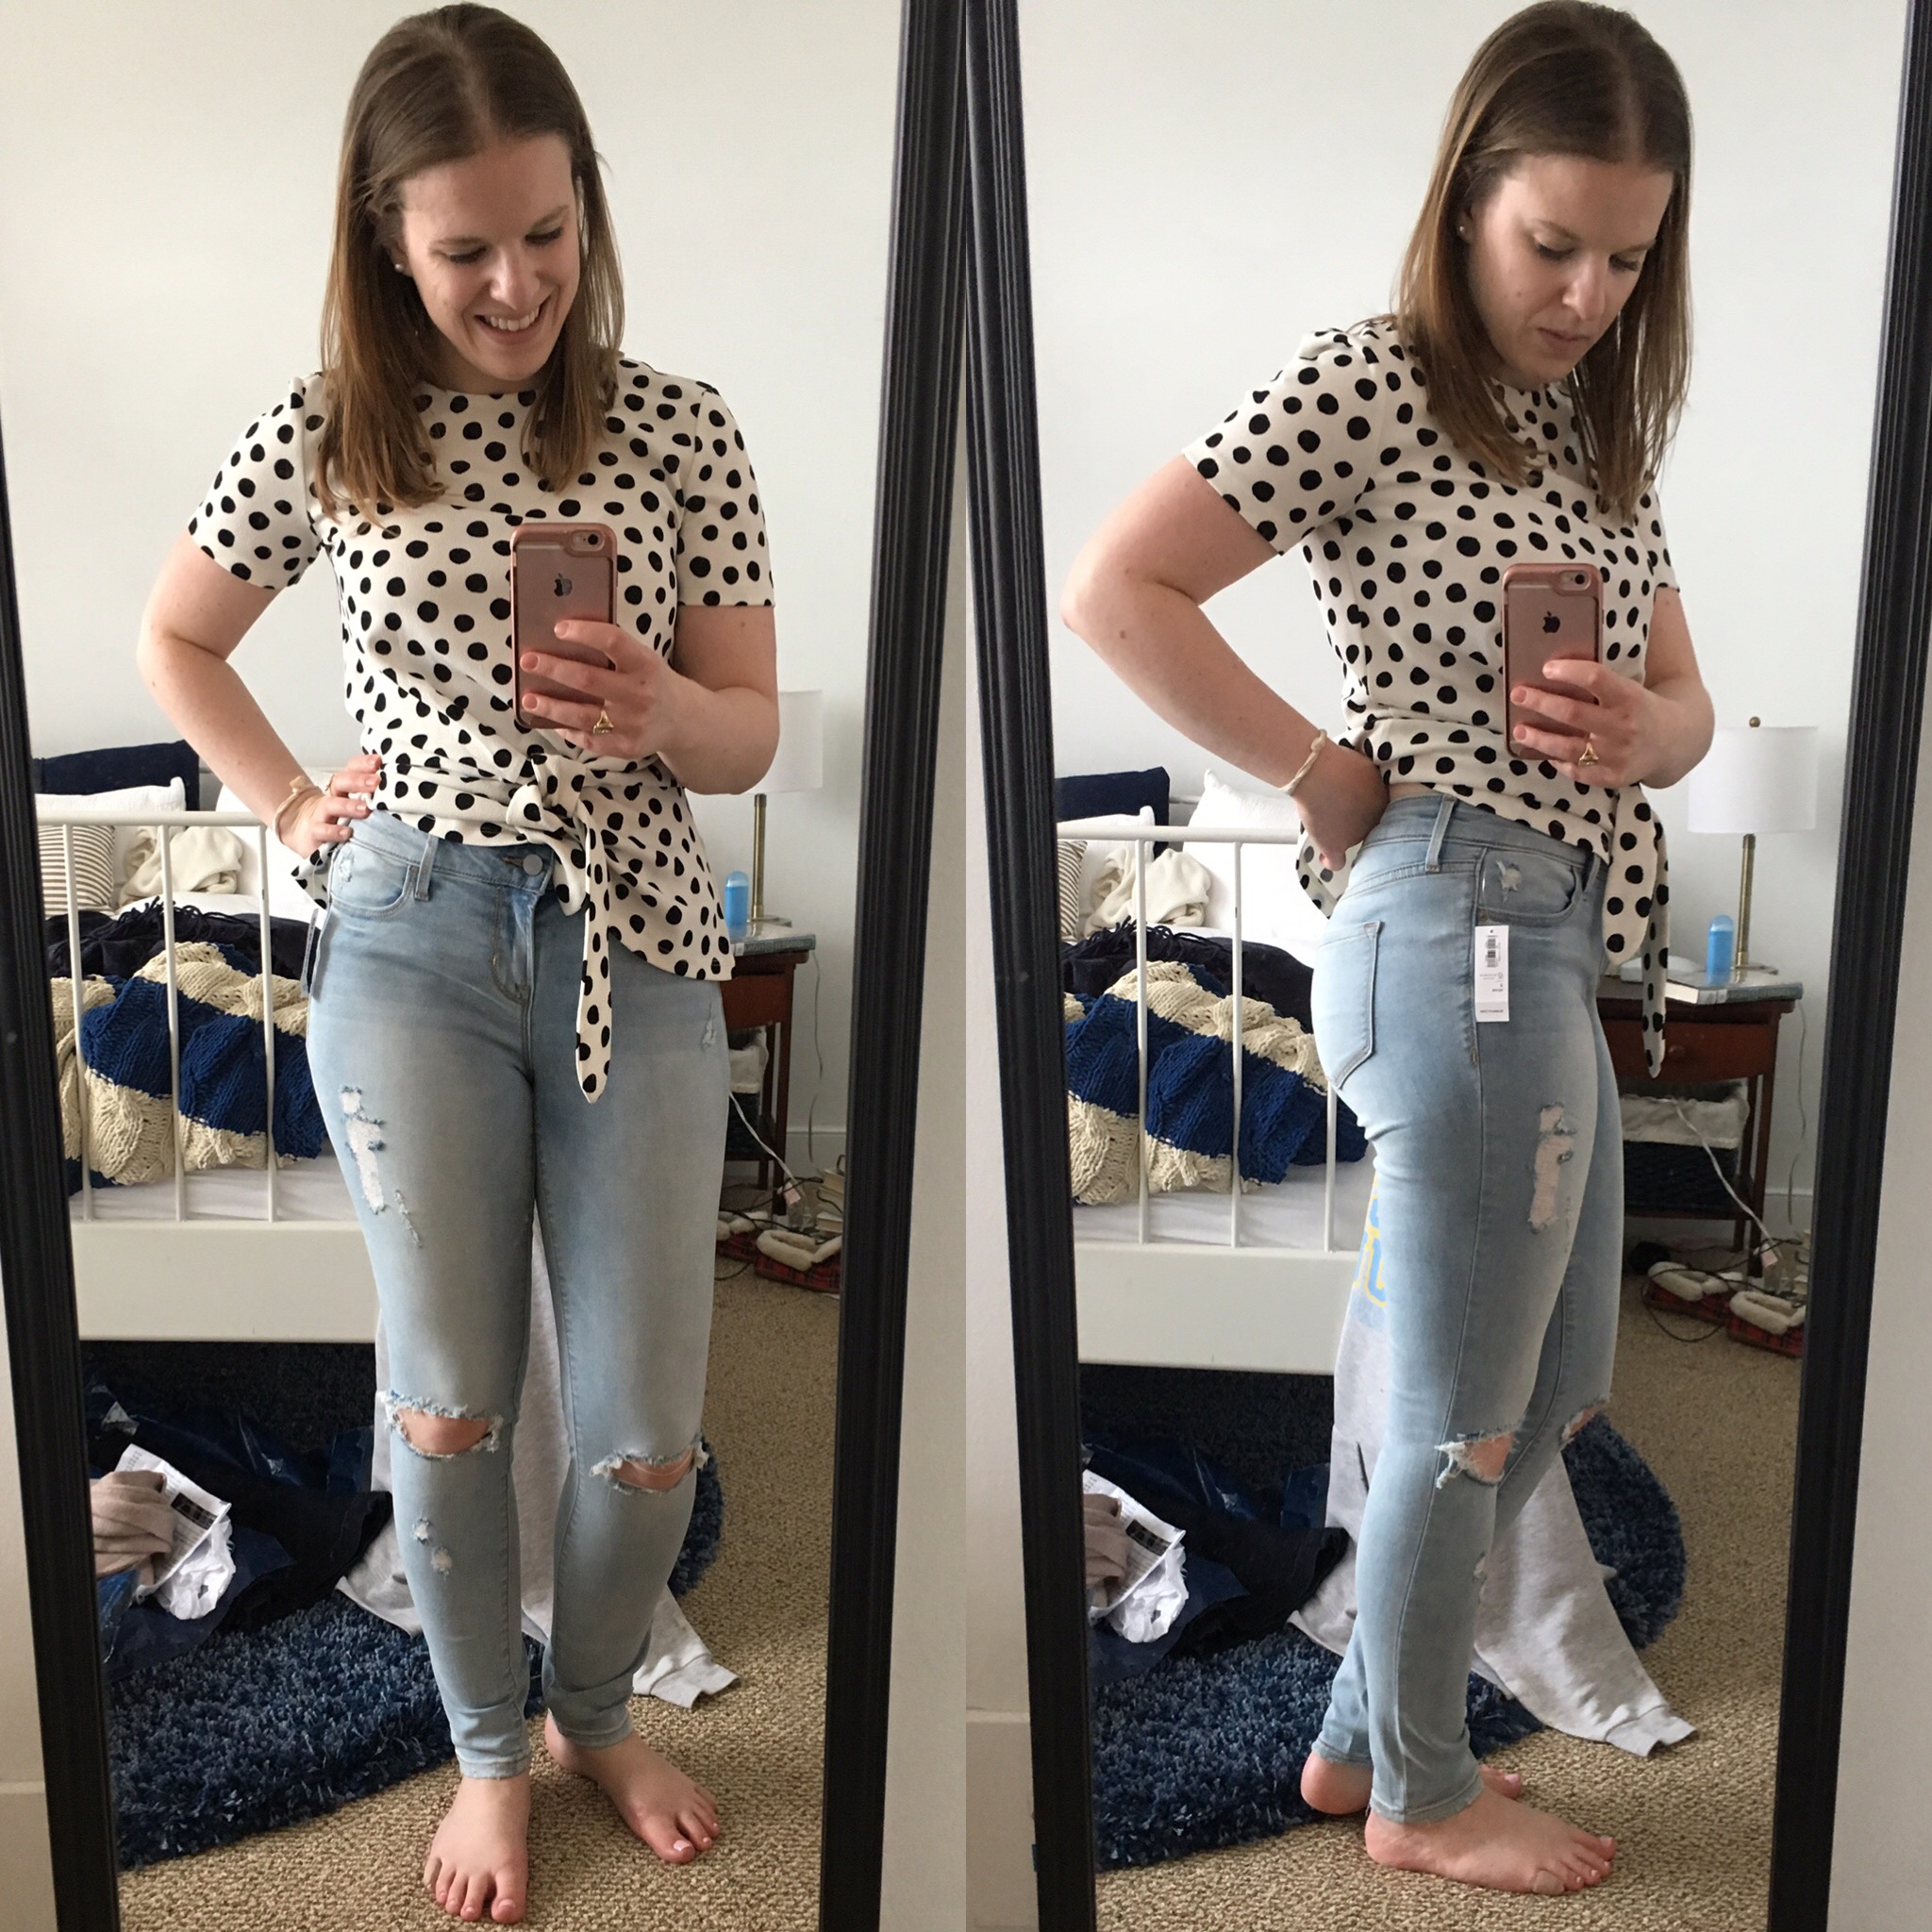 Shopping Reviews, Vol. 47 Cardigan Reviews | Something Good, @danaerinw, Old Navy Mid-Rise Rockstar Distressed Jeans